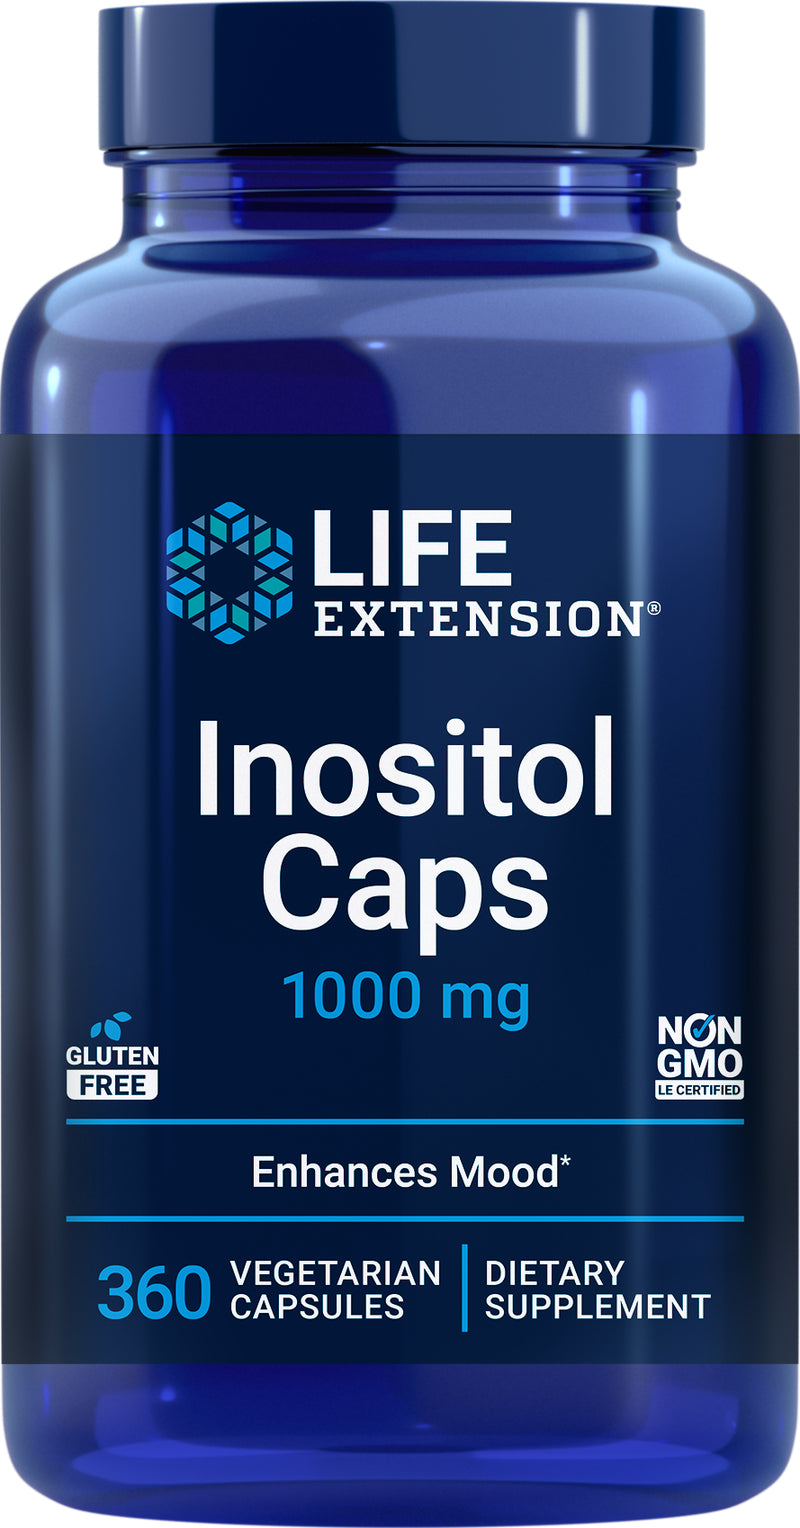 Inositol Caps 1000 mg, 360 vegetarian capsules by Life Extension